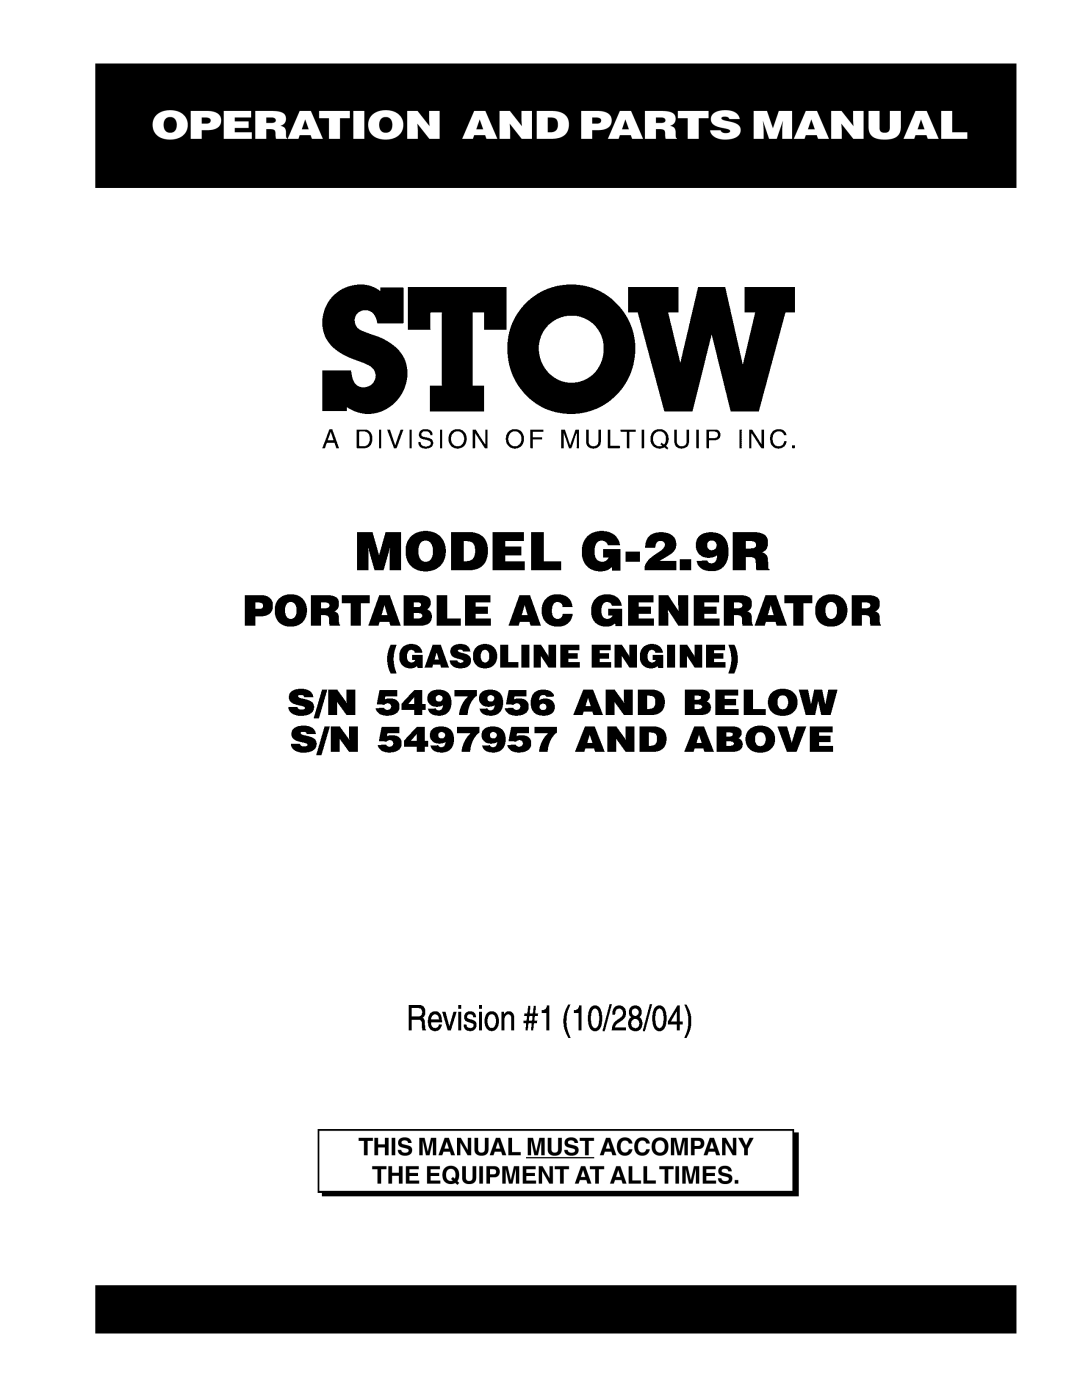 Stow manual Operation And Parts Manual, MODEL G-2.9R, Portable Ac Generator, Revision #1 10/28/04, Gasoline Engine 